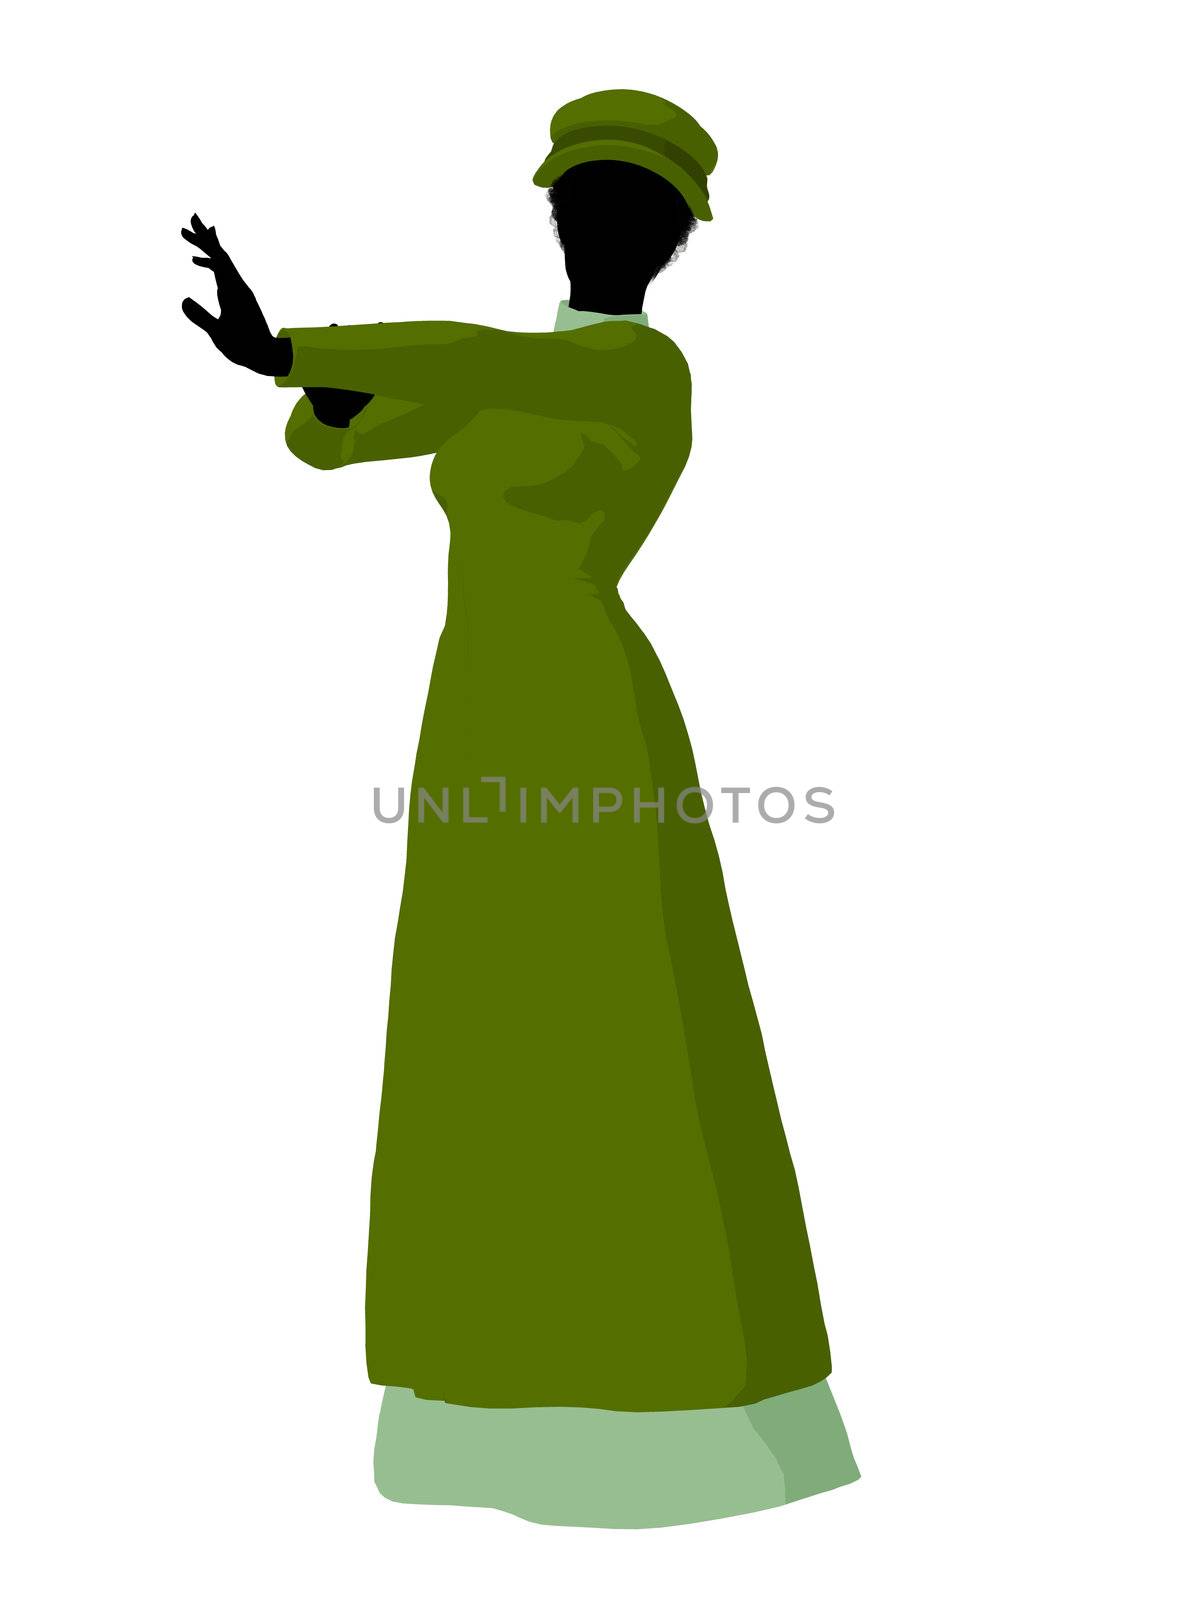 African American Victorian Woman Illustration Silhouette by kathygold